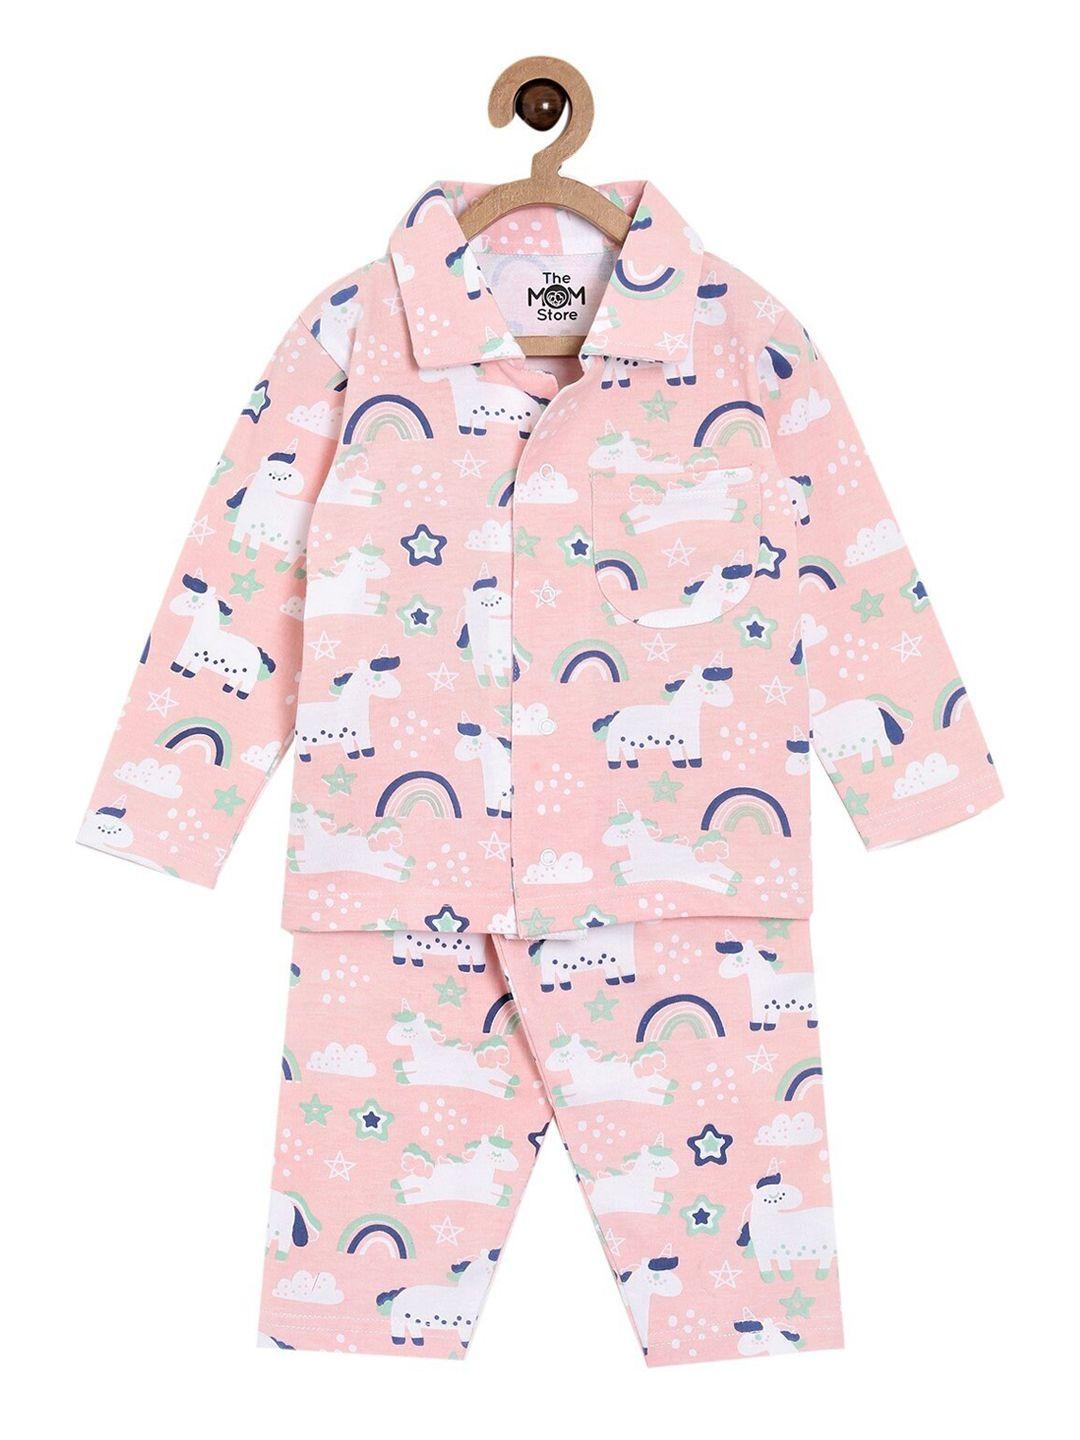 the mom store unisex kids peach-coloured pure cotton printed night suit